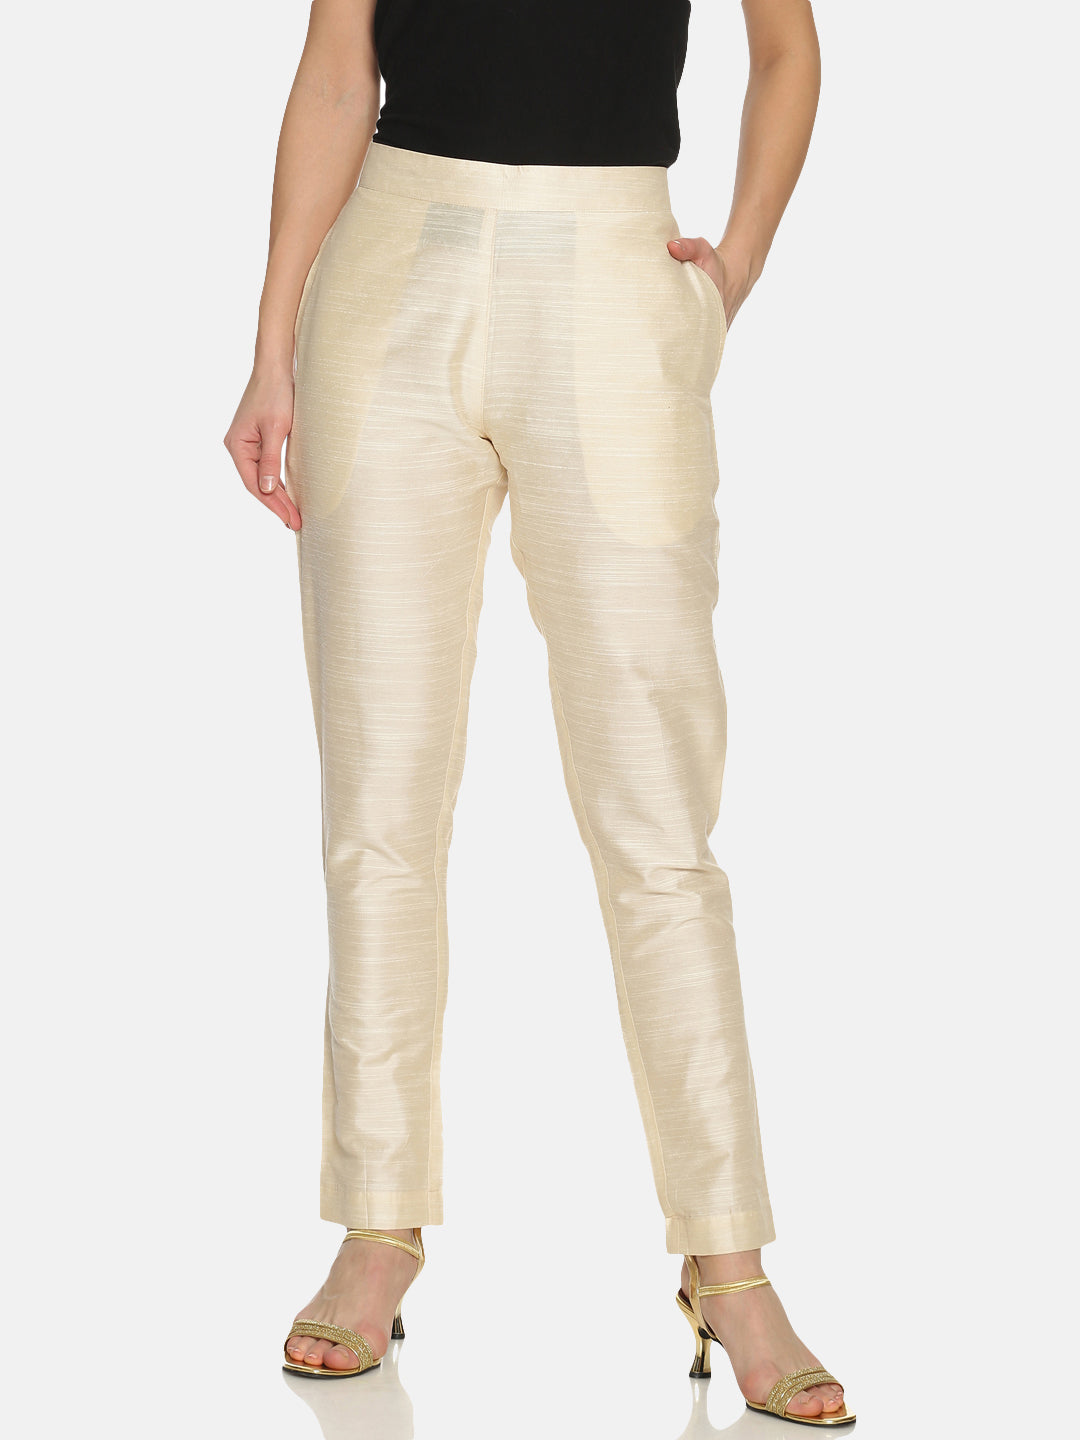 Fabcoast Women Cream Trousers Pants cotton formal with adjustable waist  buttons and 2 side pockets at Rs 469/piece in Ajmer